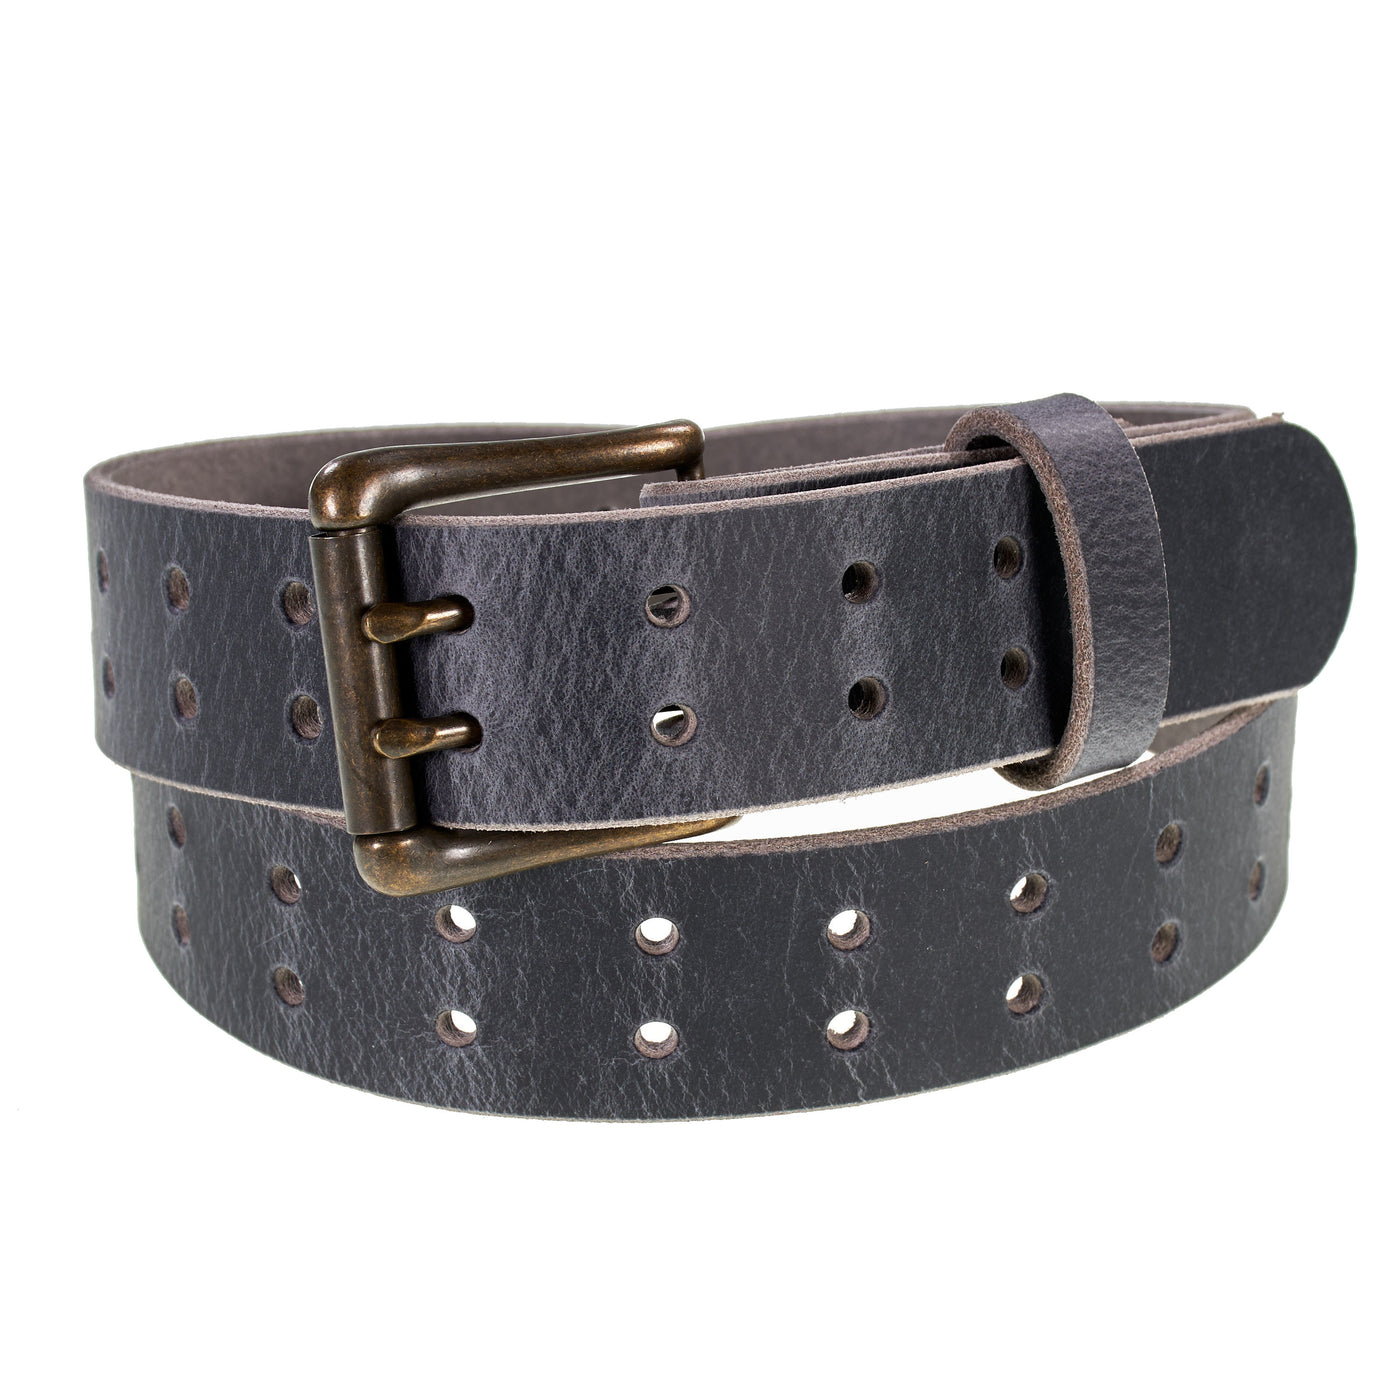 Double Prong Retro Style Leather Belt - 1.5" Antique Brass Buckle